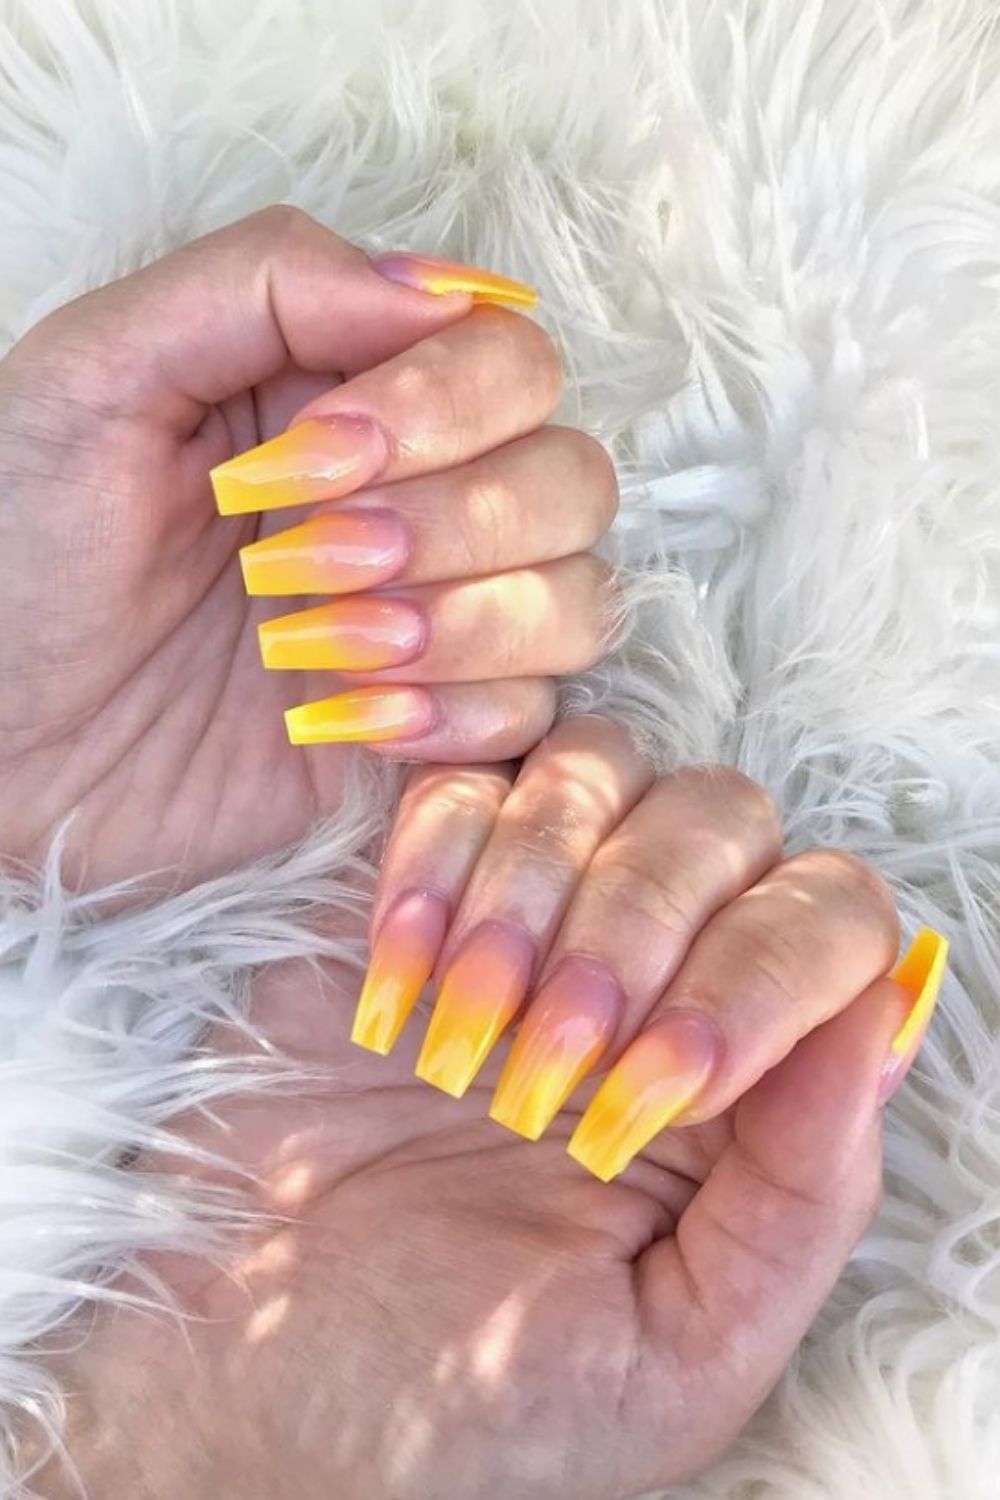 40+Cute Ombre coffin nails for young girls